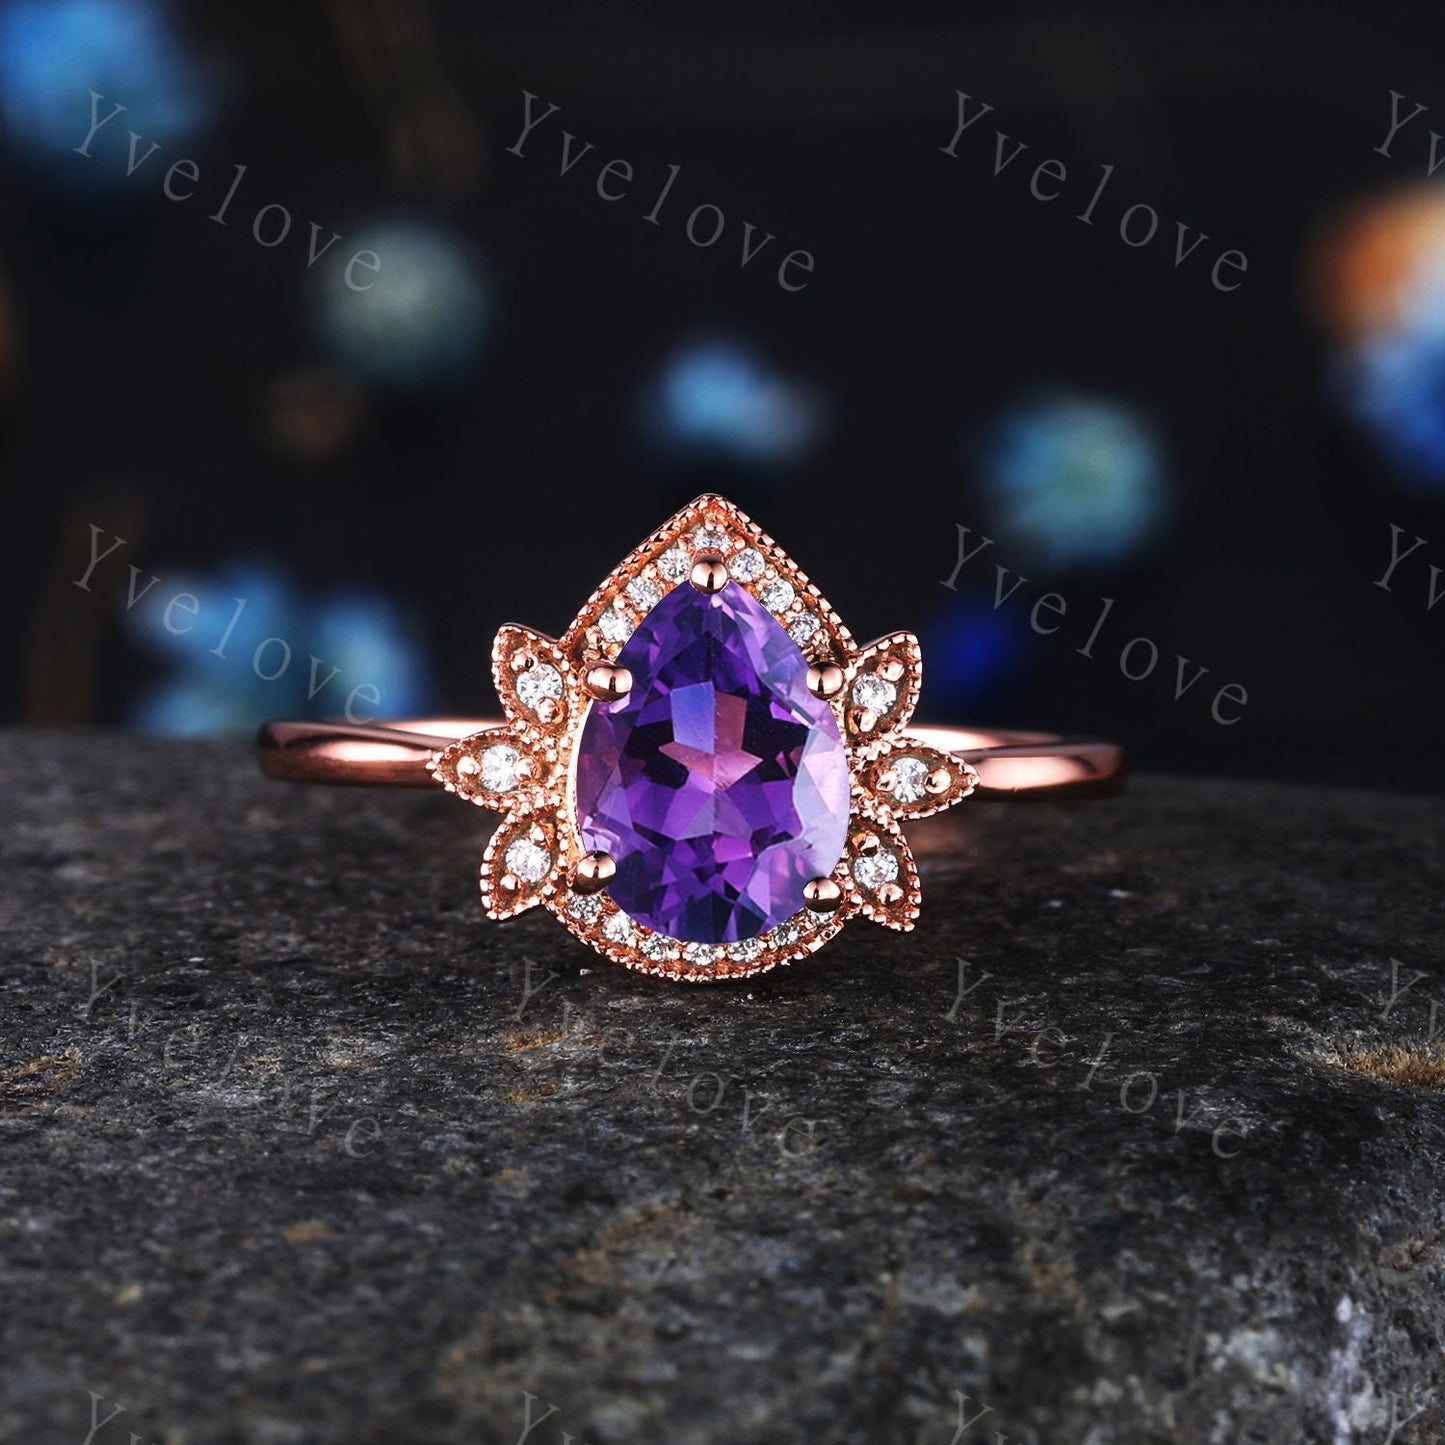 8x6mm pear shaped amethyst engagement ring 14K rose gold unique flower ring